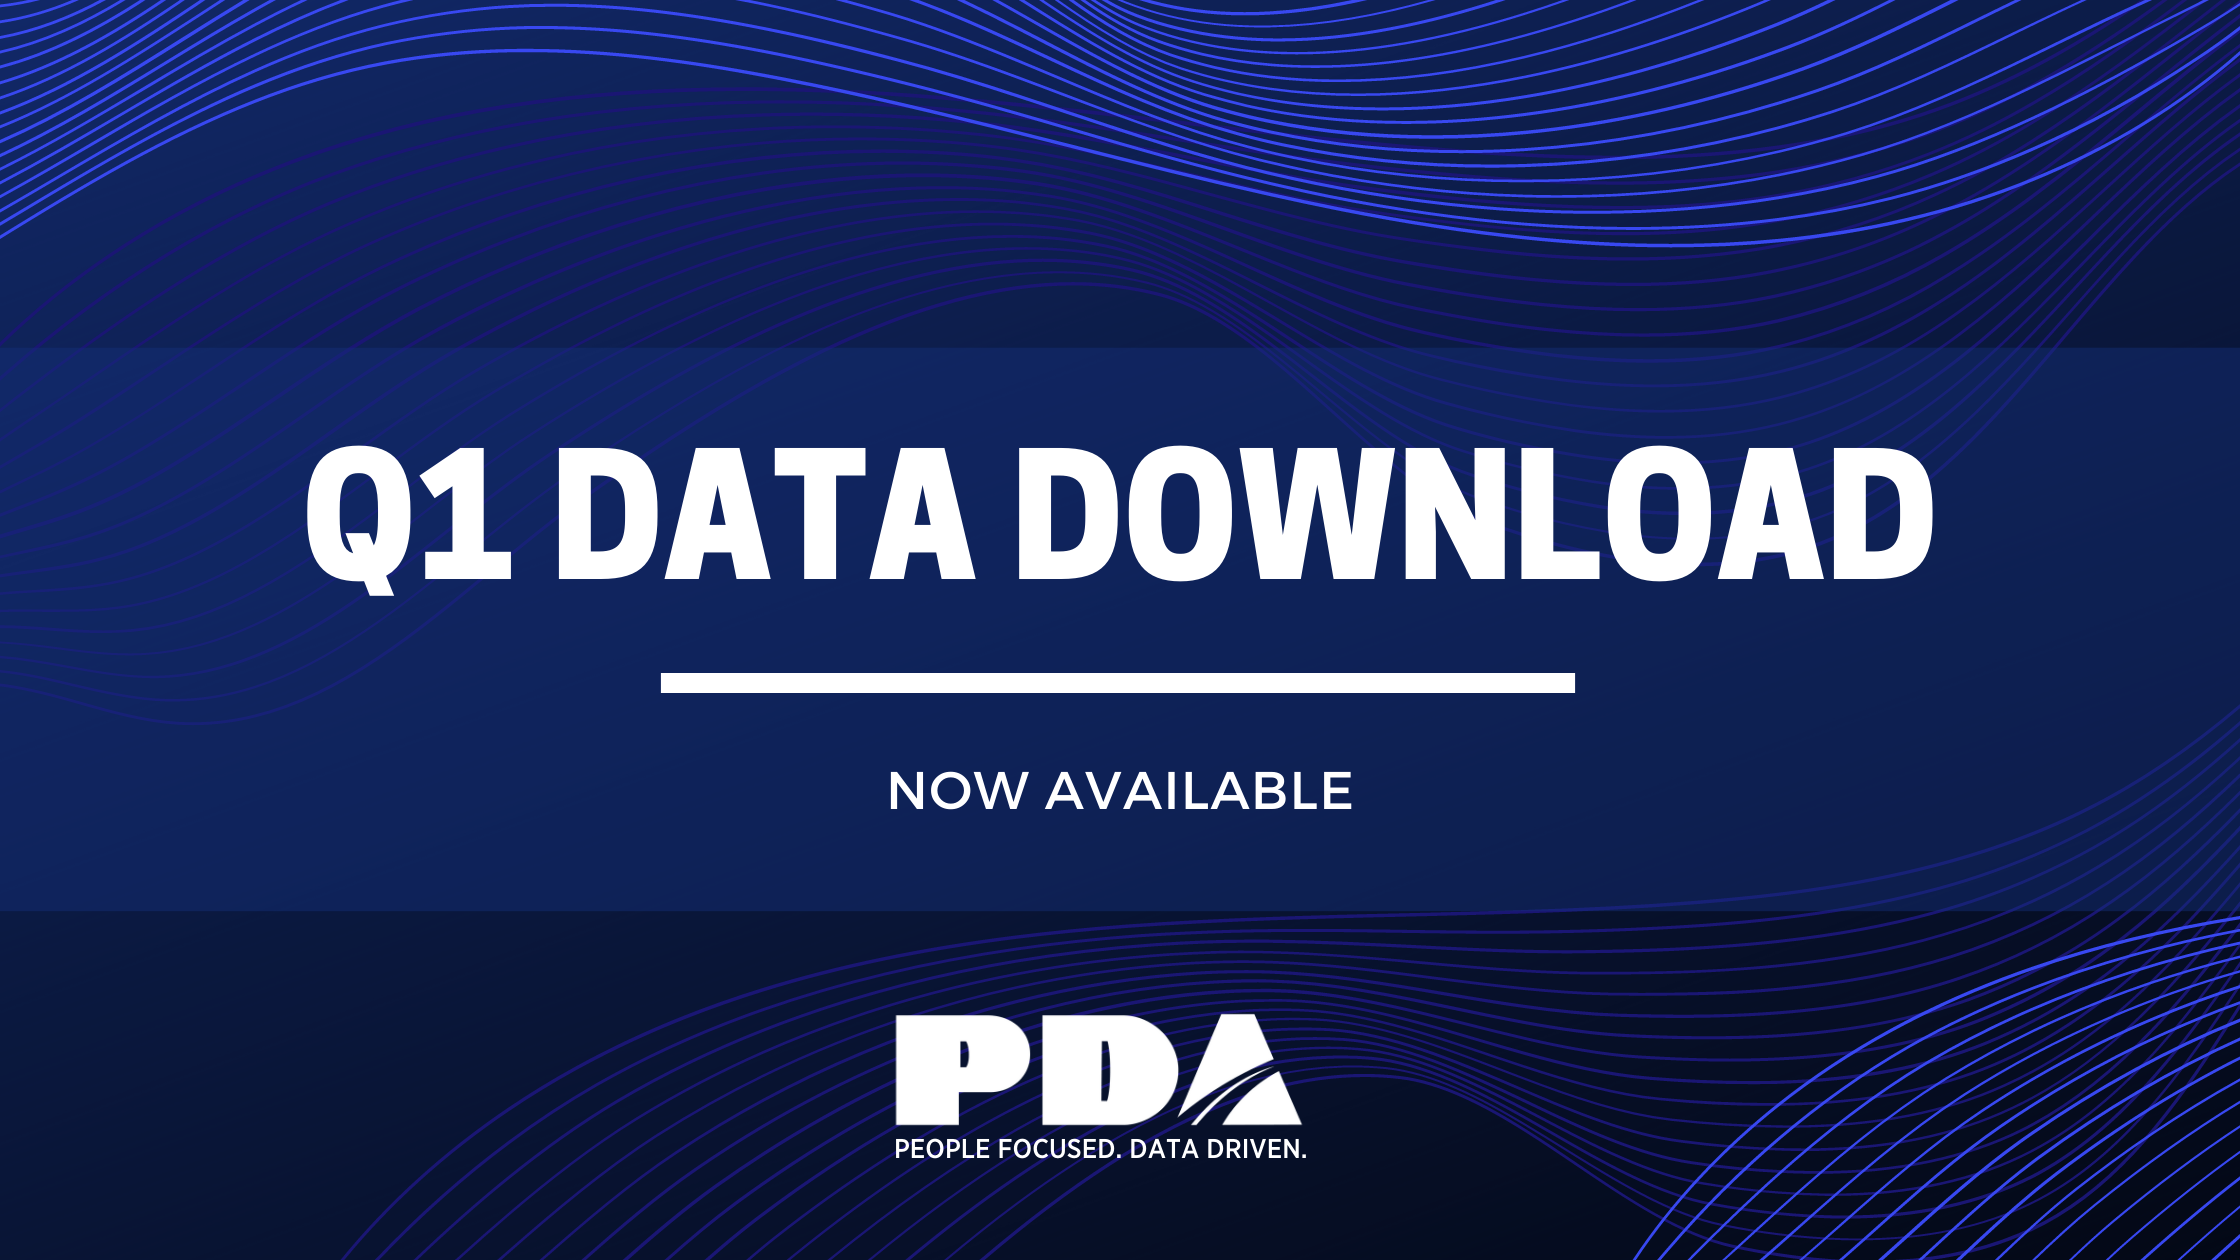 Message Reading: Q1 Data Download from PDA.